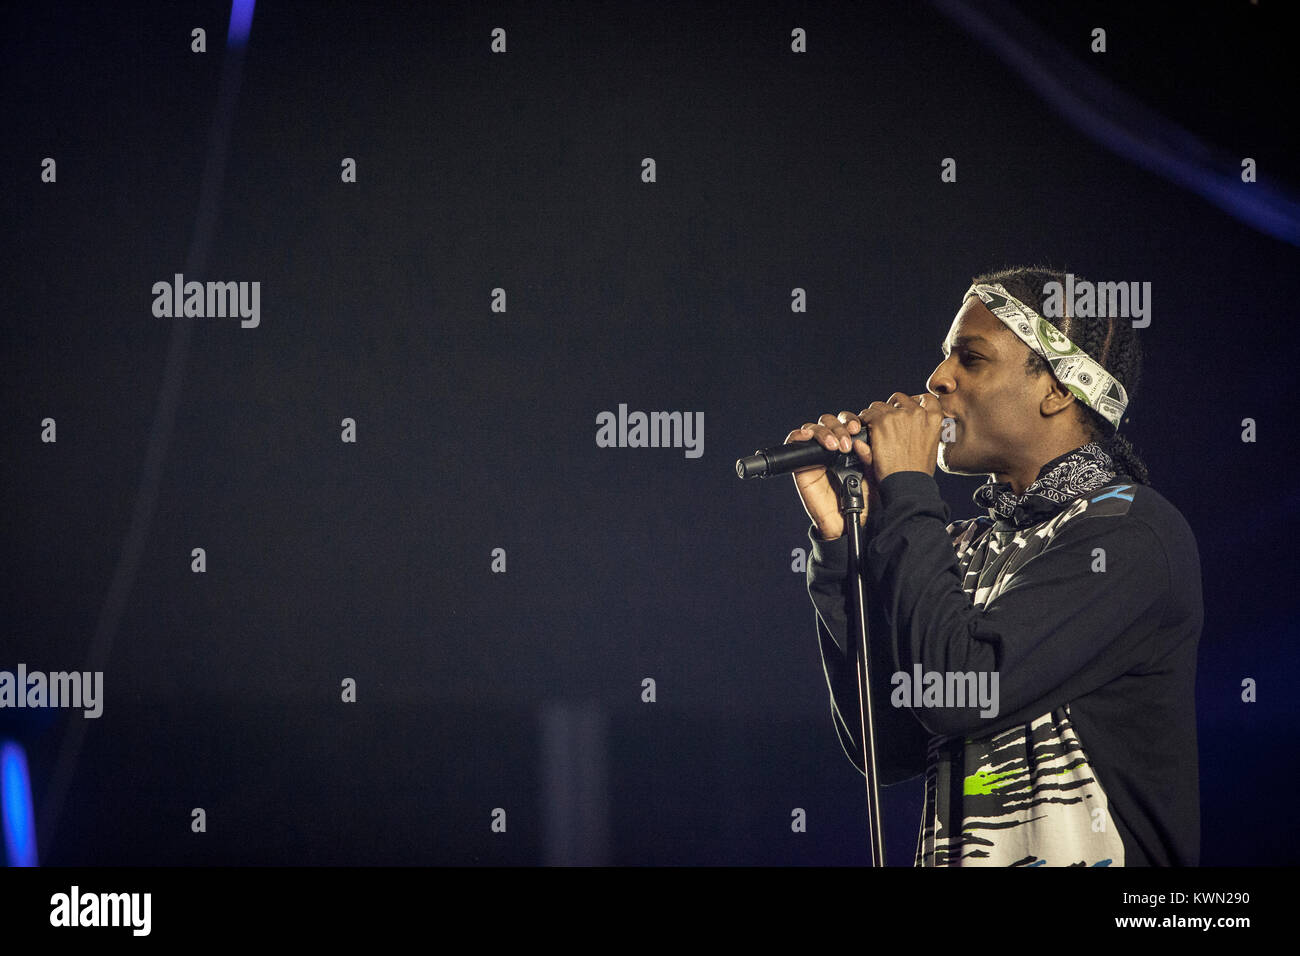 The American rapper and producer A$AP Rocky pictured live on stage at Splash Festival 2013 in Germany. Stock Photo